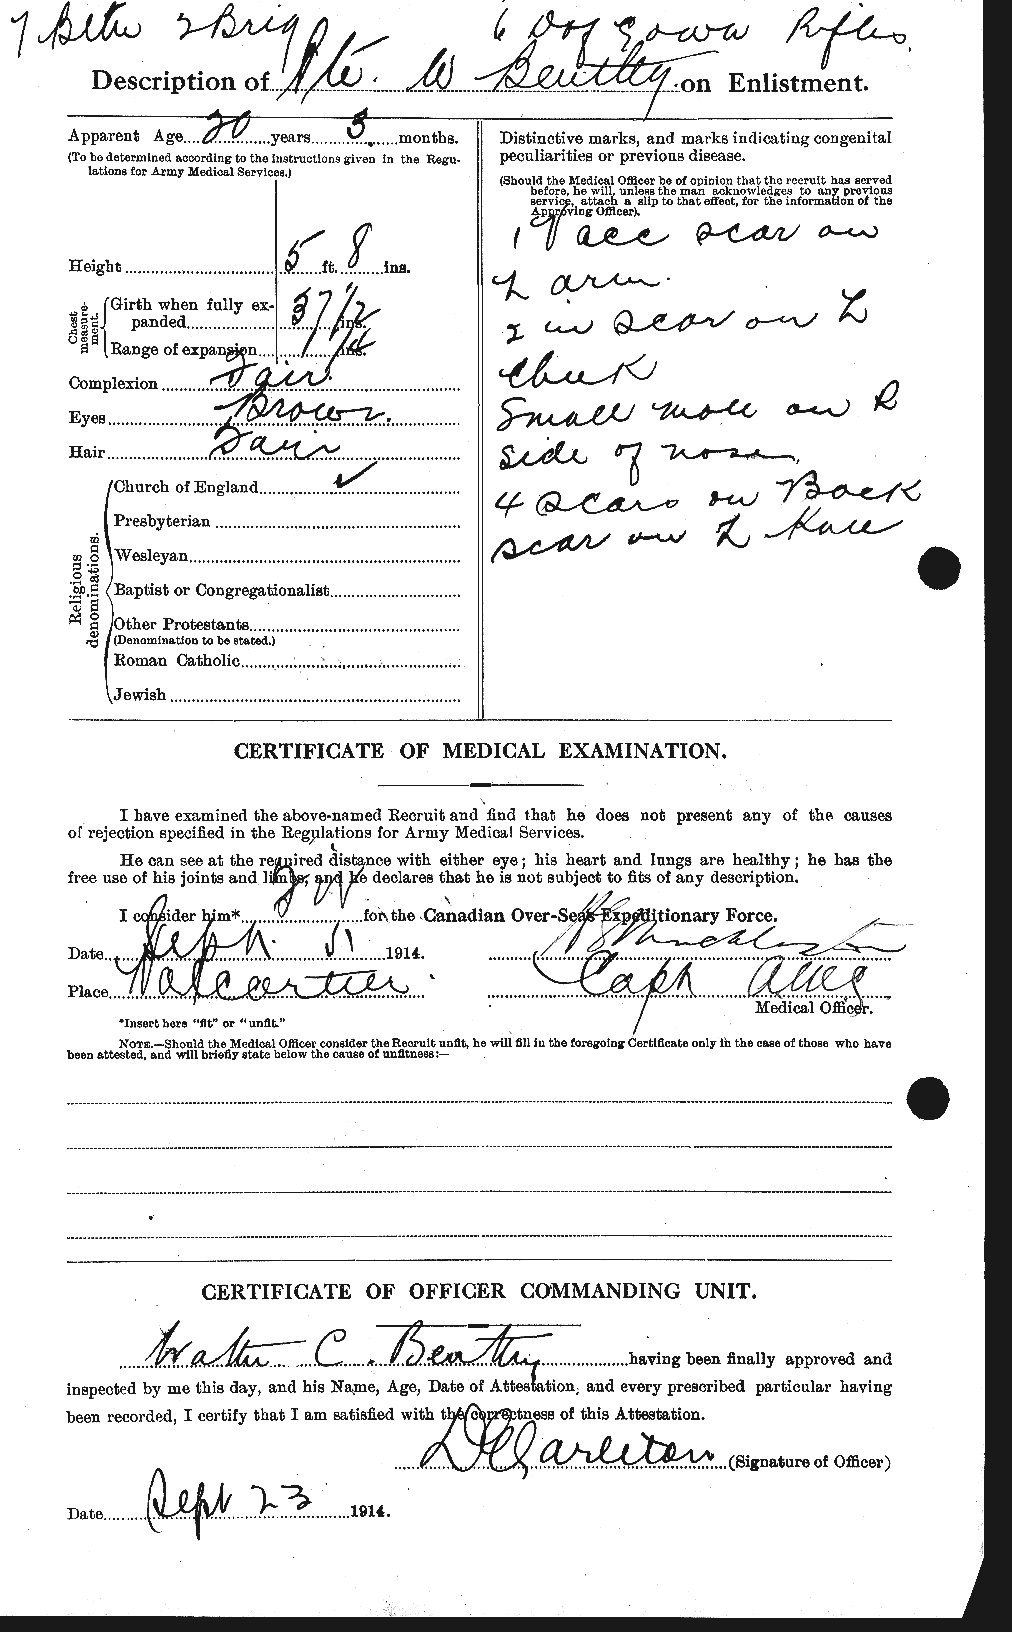 Personnel Records of the First World War - CEF 237842b